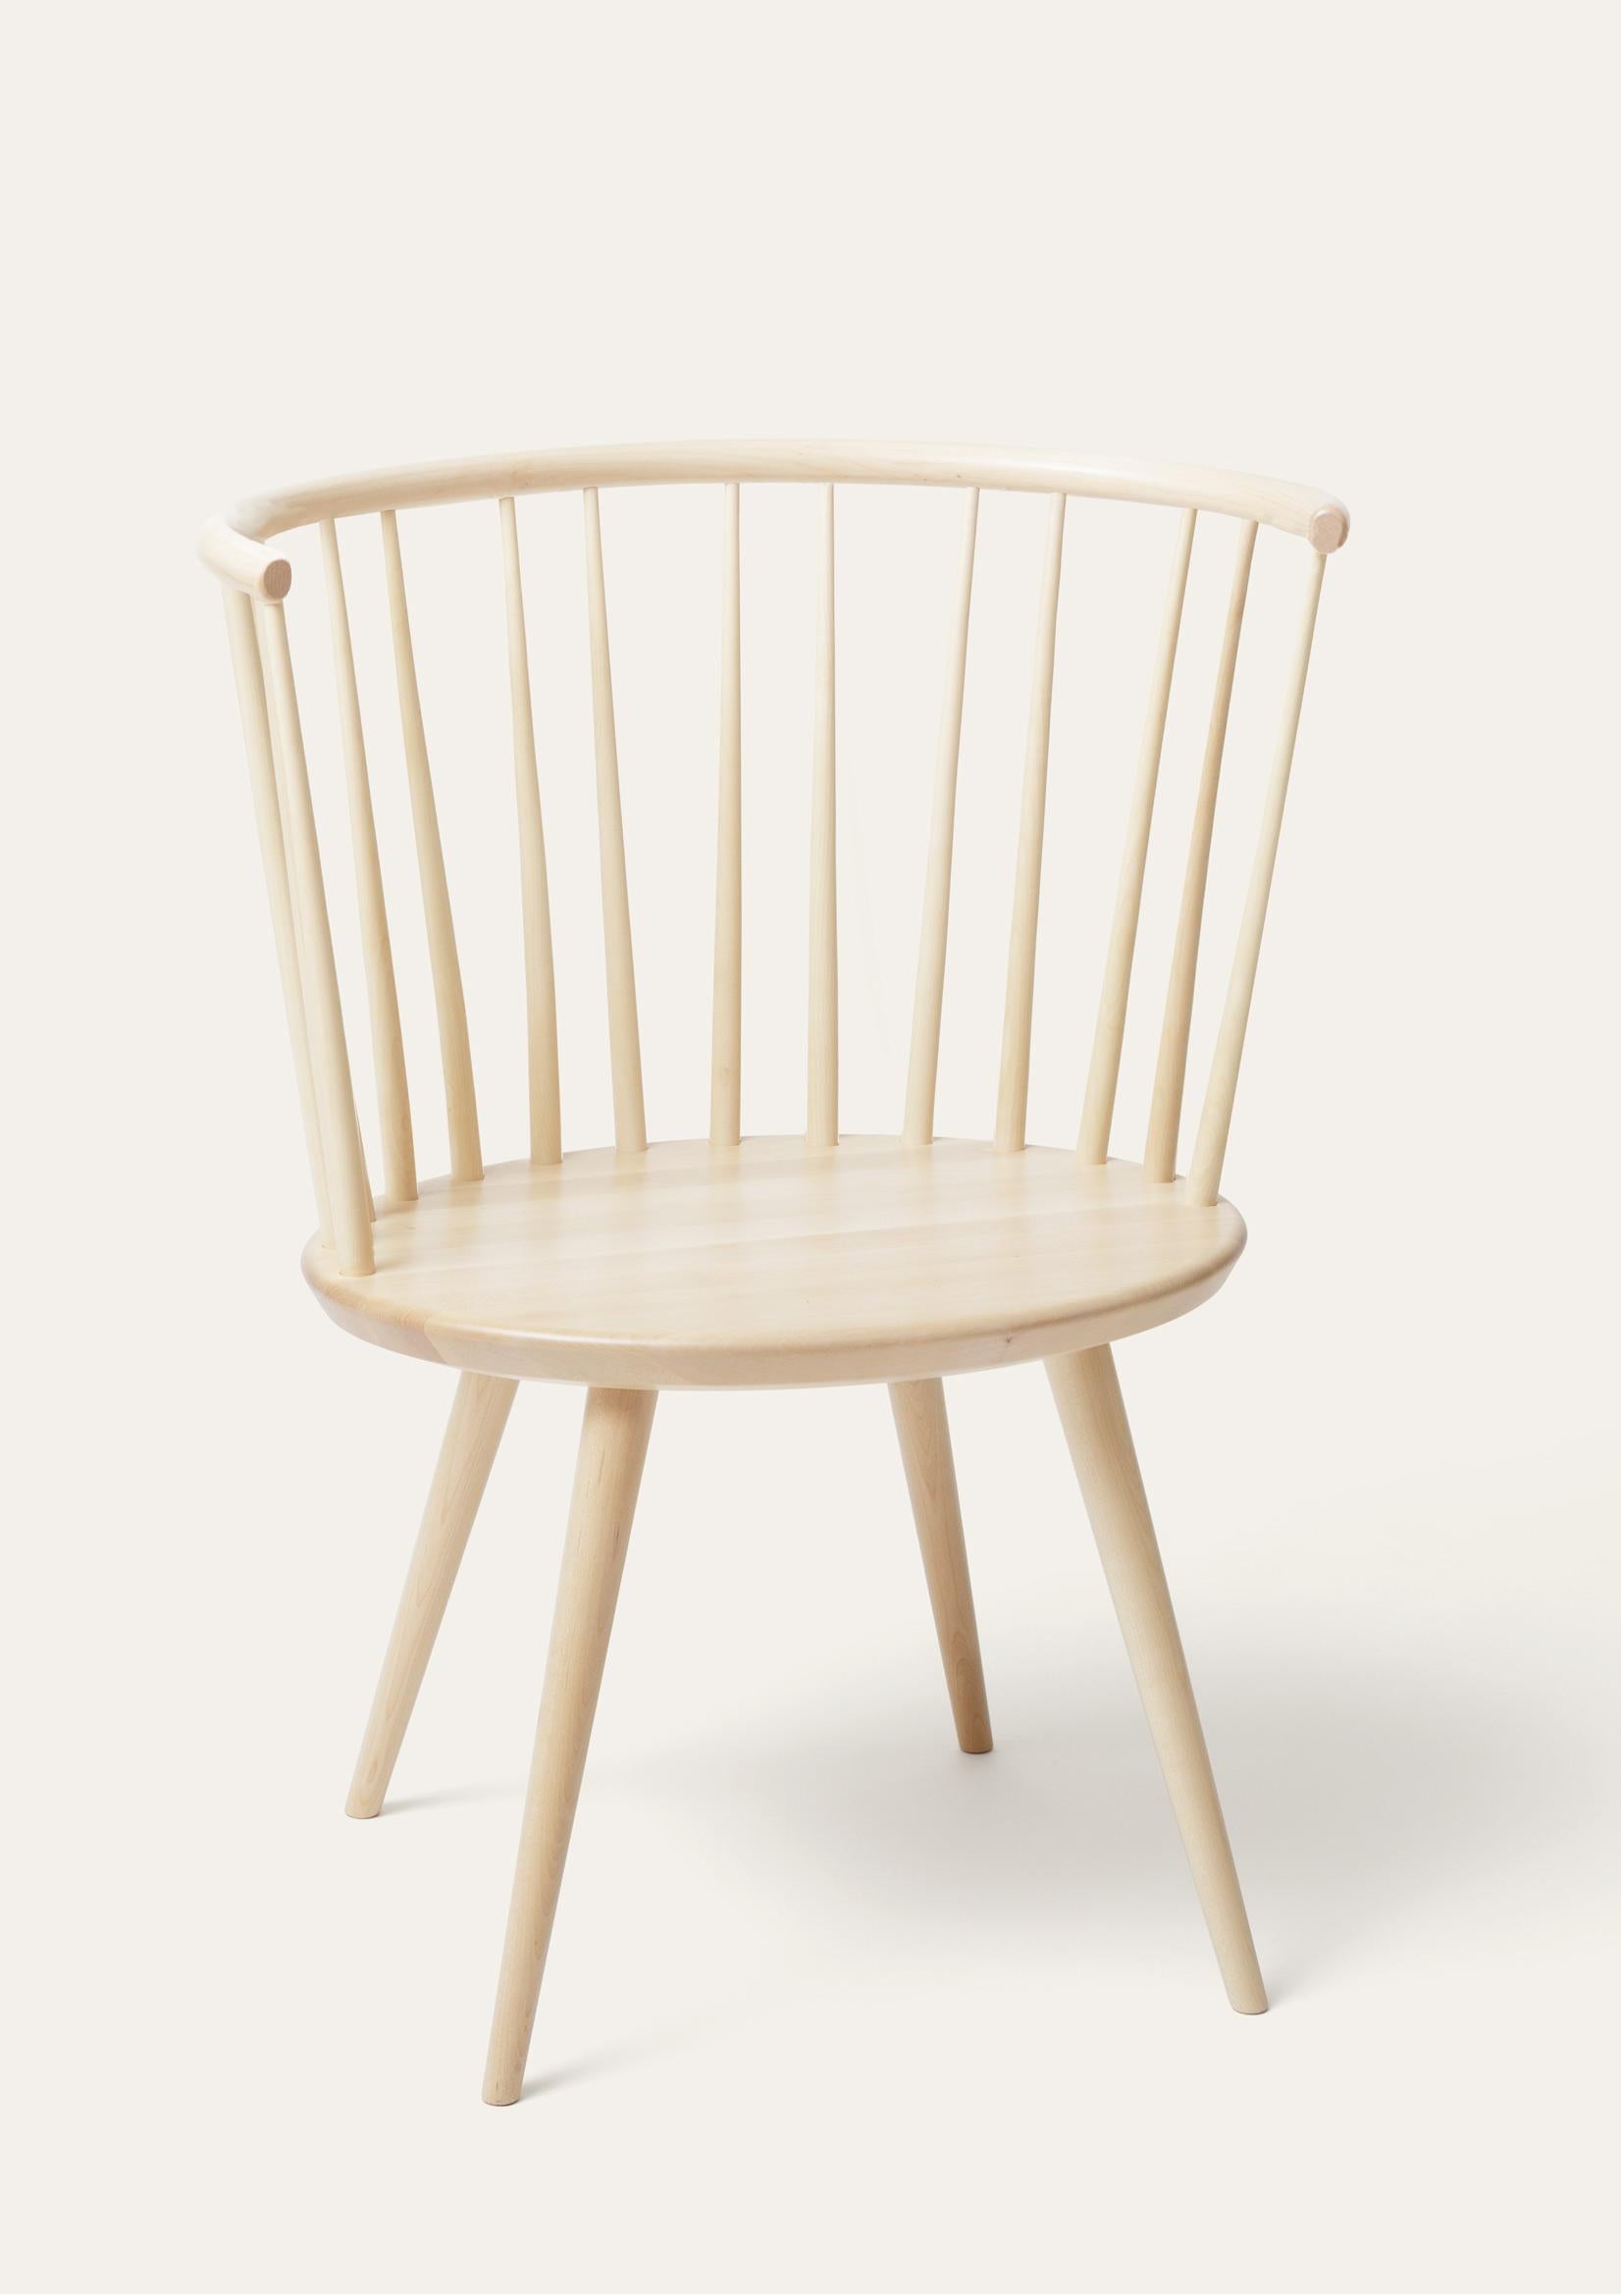 Natural Lillängen birch chair by Storängen Design
Dimensions: D 52 x W 71 x H 85 x SH 42 cm
Materials: birch wood
Also available in other colors, with seat and back cushion.

Lillängen is Storängen's younger sibling, somewhat more compact in